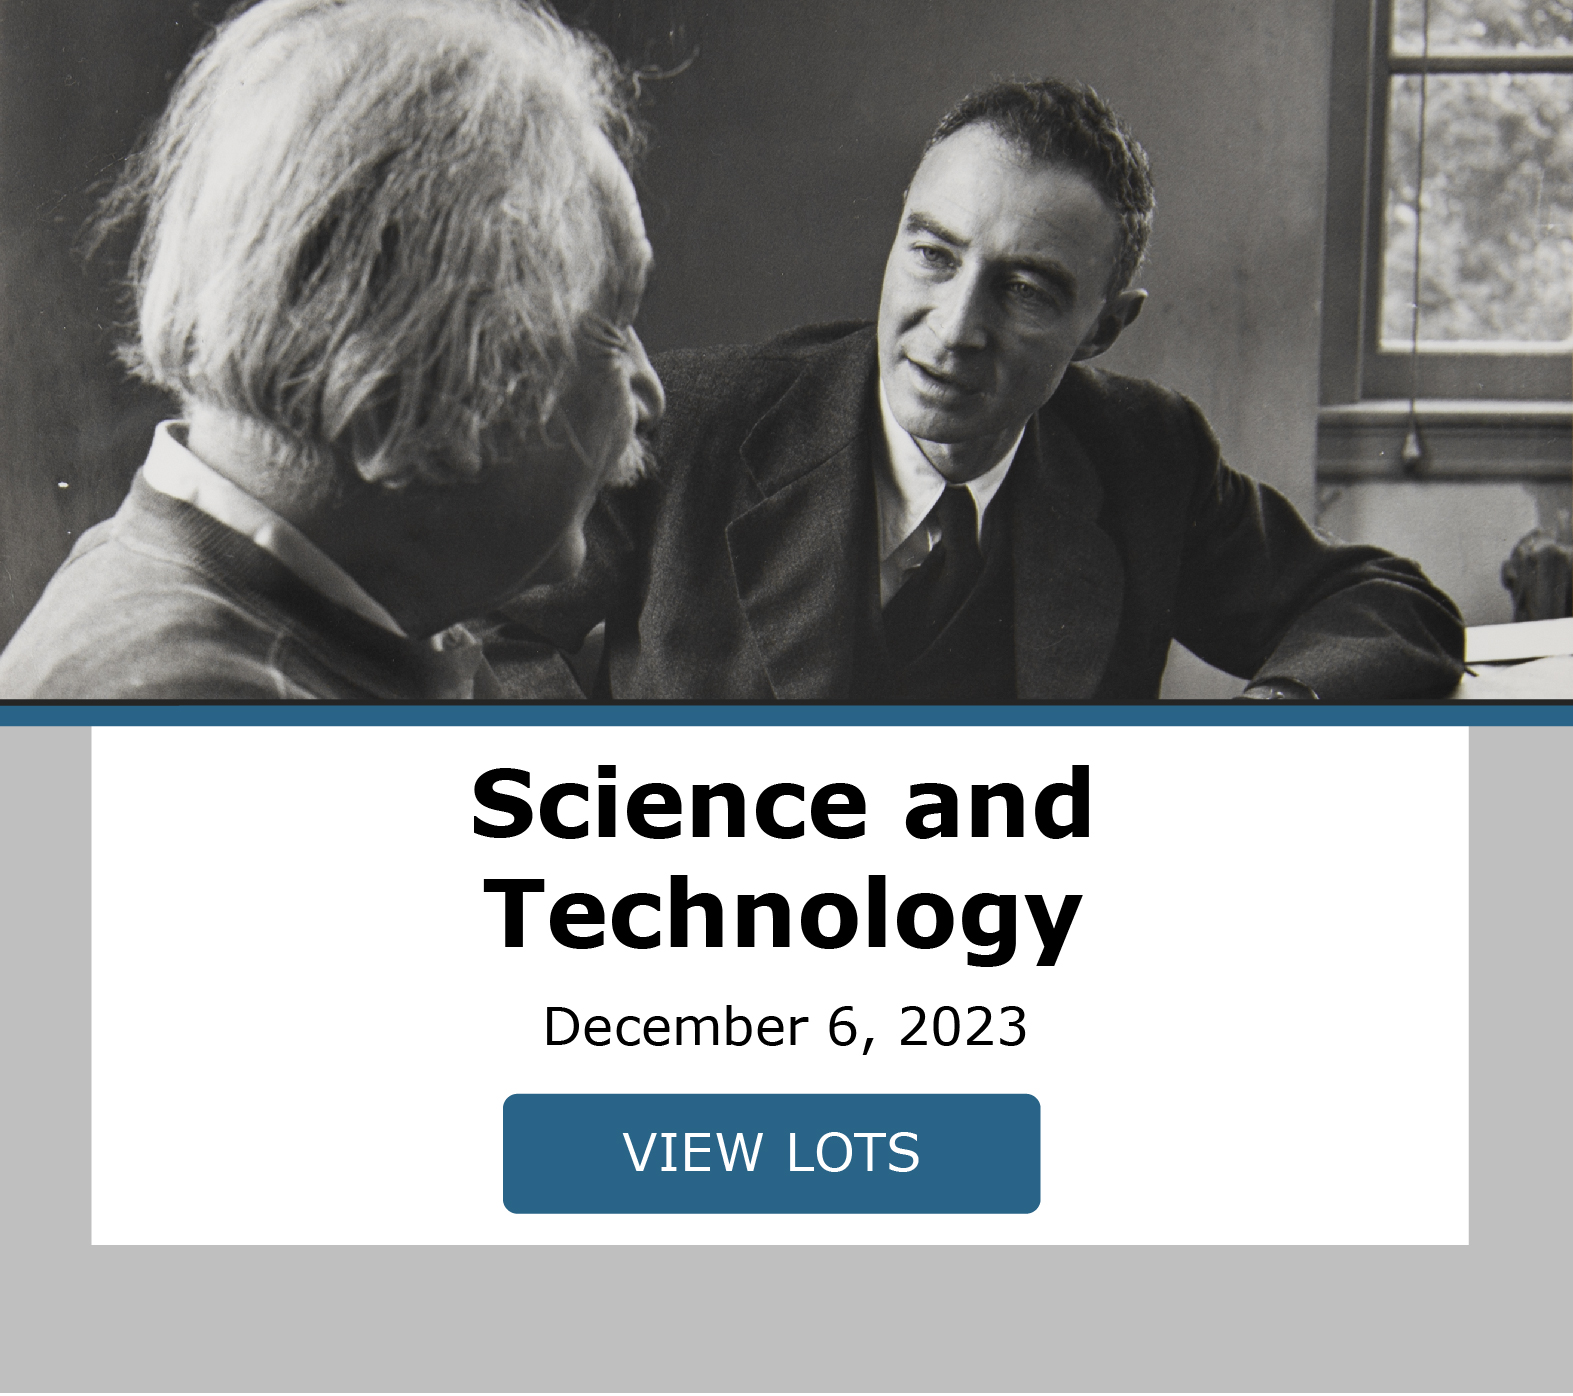 Science and Technology. Bidding closes December 6th. View Lots!